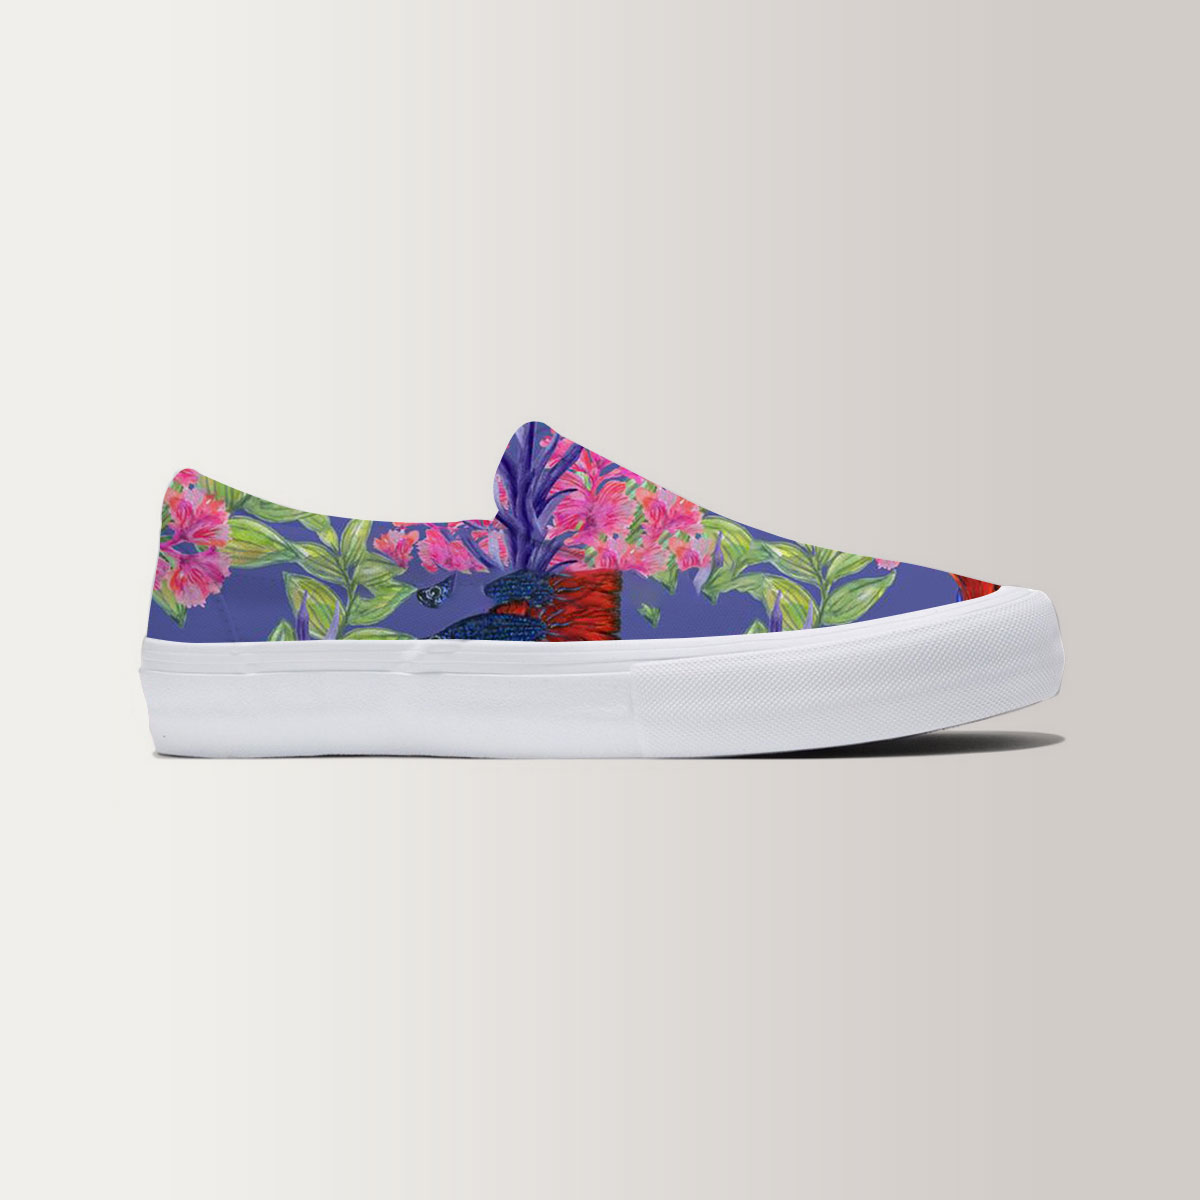 Floral Betta Fish Slip On Sneakers